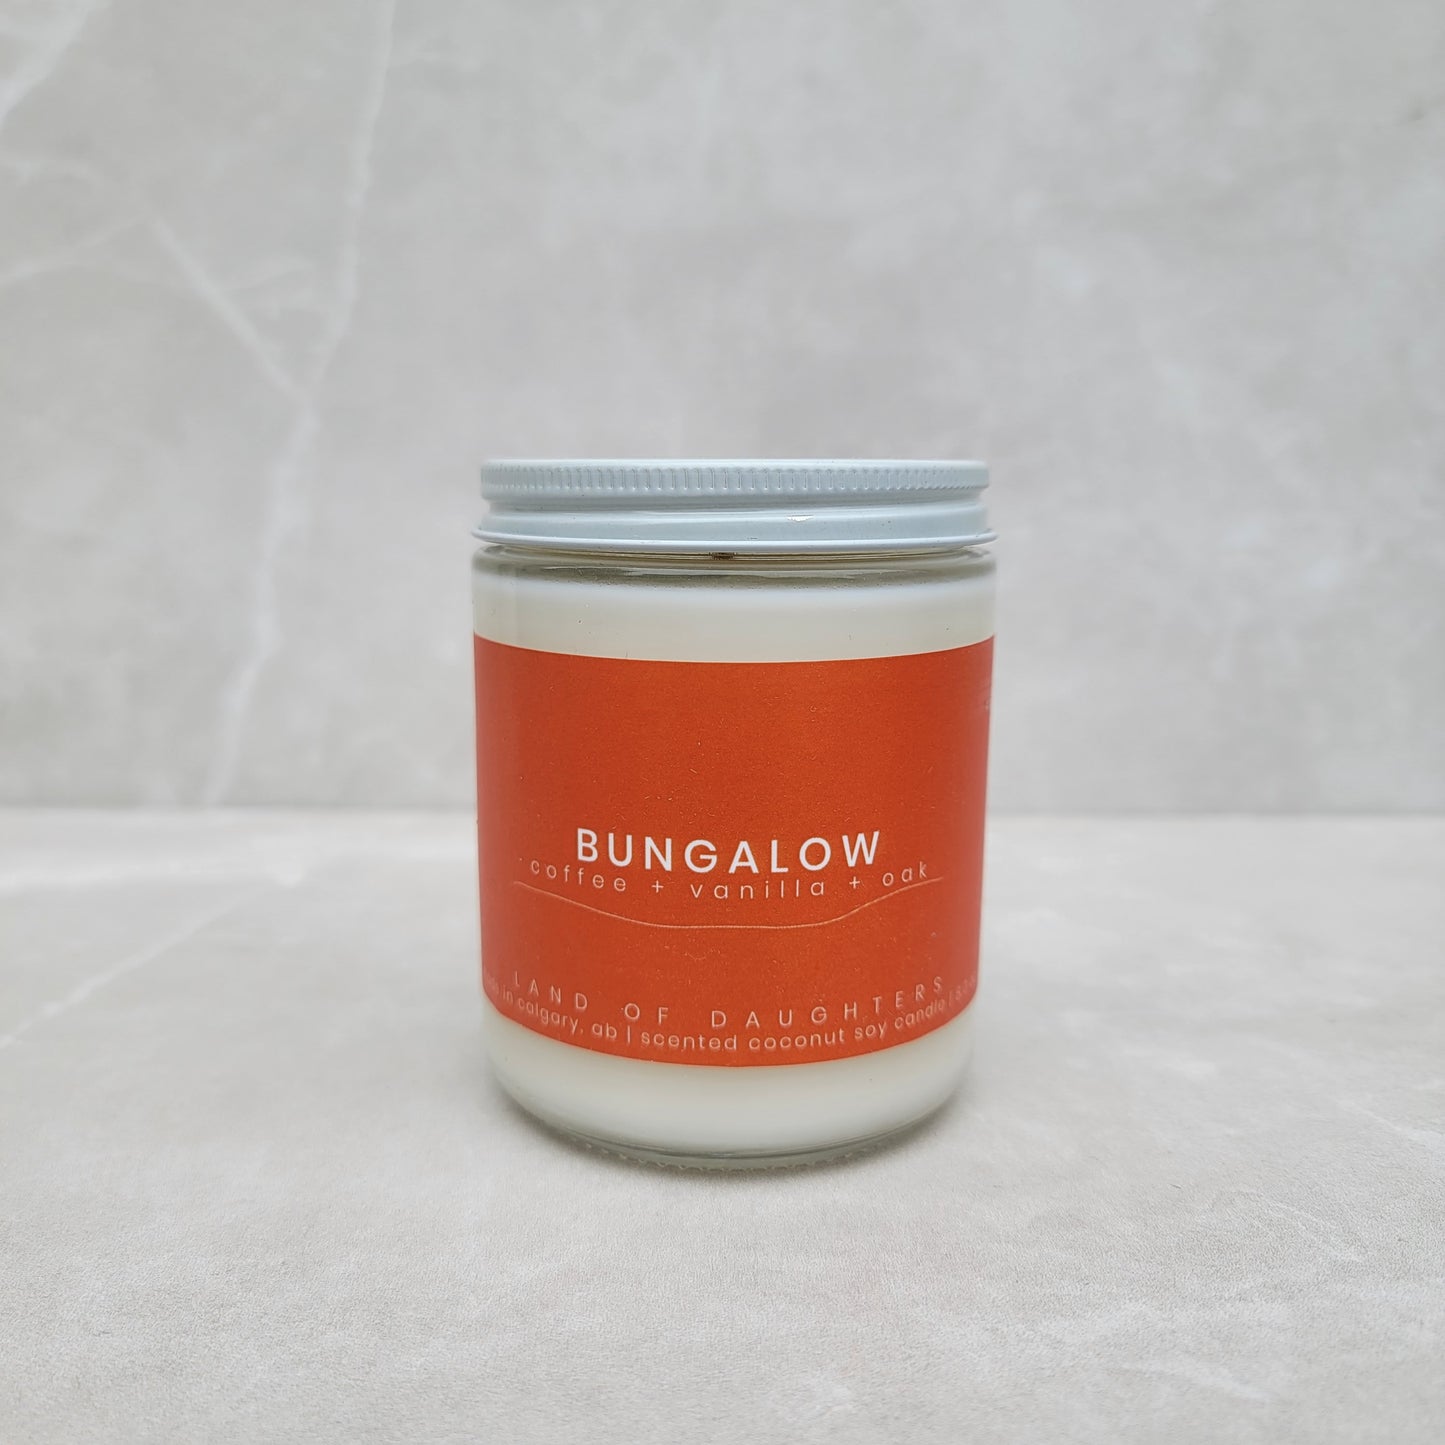 land of daughters bungalow candle